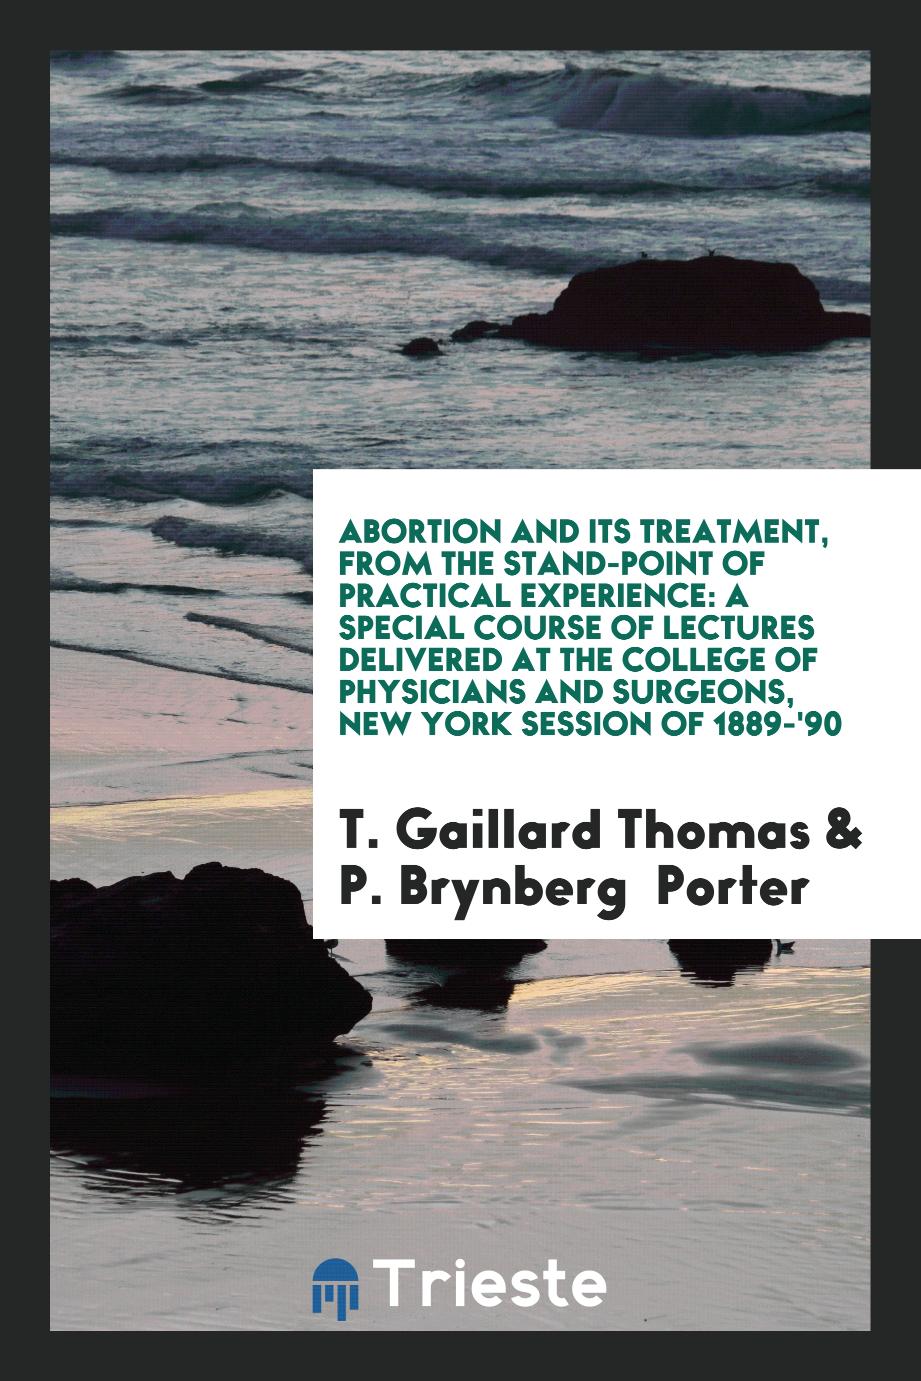 Abortion and Its Treatment, from the Stand-Point of Practical Experience: A Special Course of Lectures Delivered at the College of Physicians and Surgeons, New York Session of 1889-'90